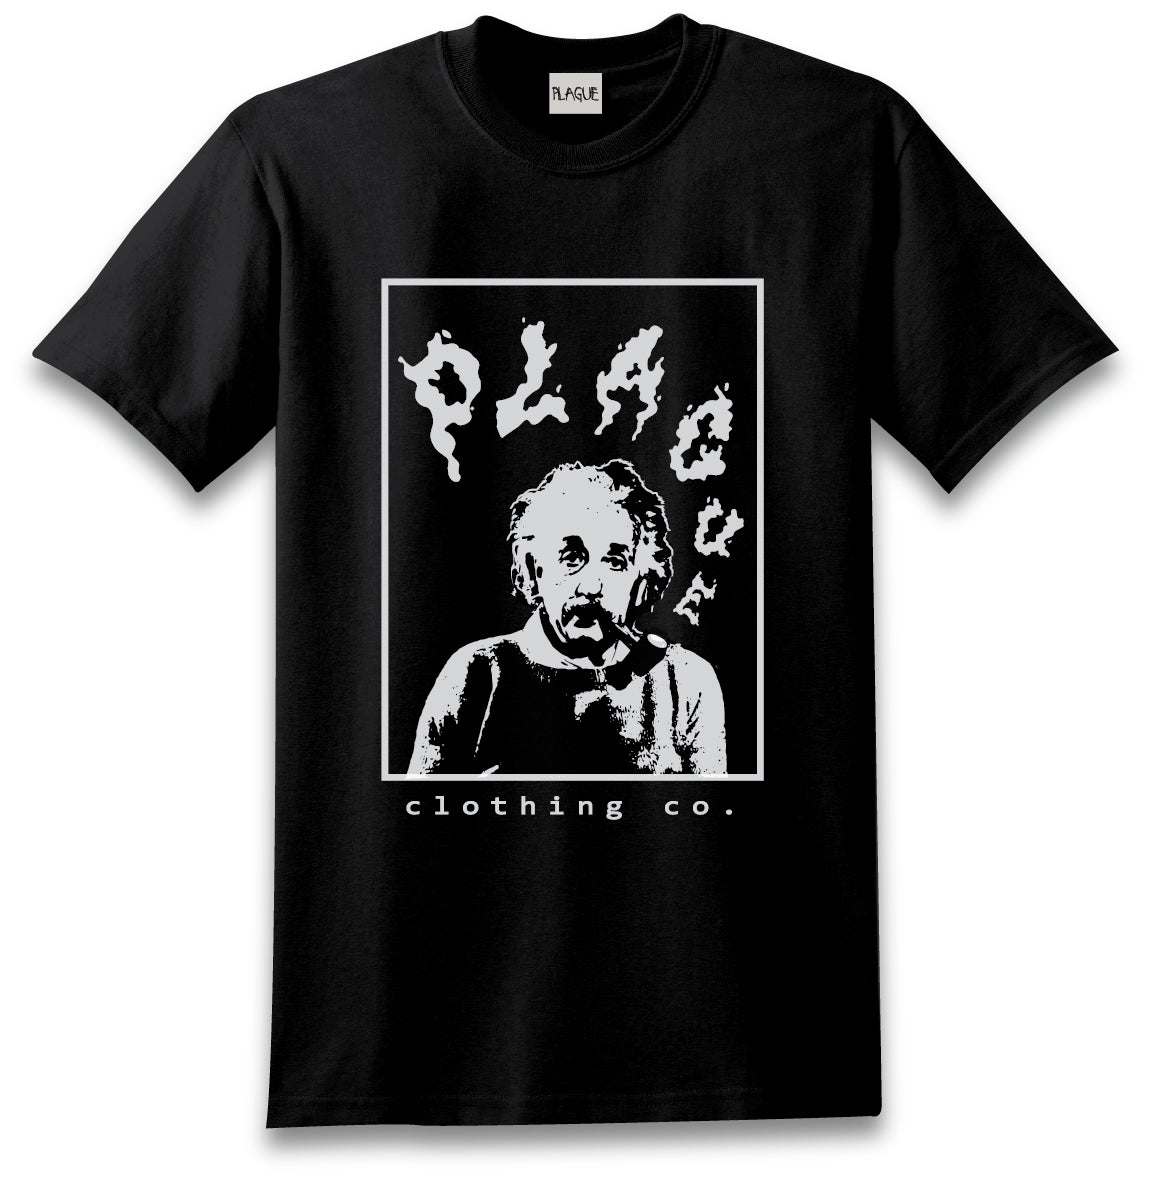 Realistic print of Einstein smoking a pipe, with smoky text reading "plague" on front of a black tee.